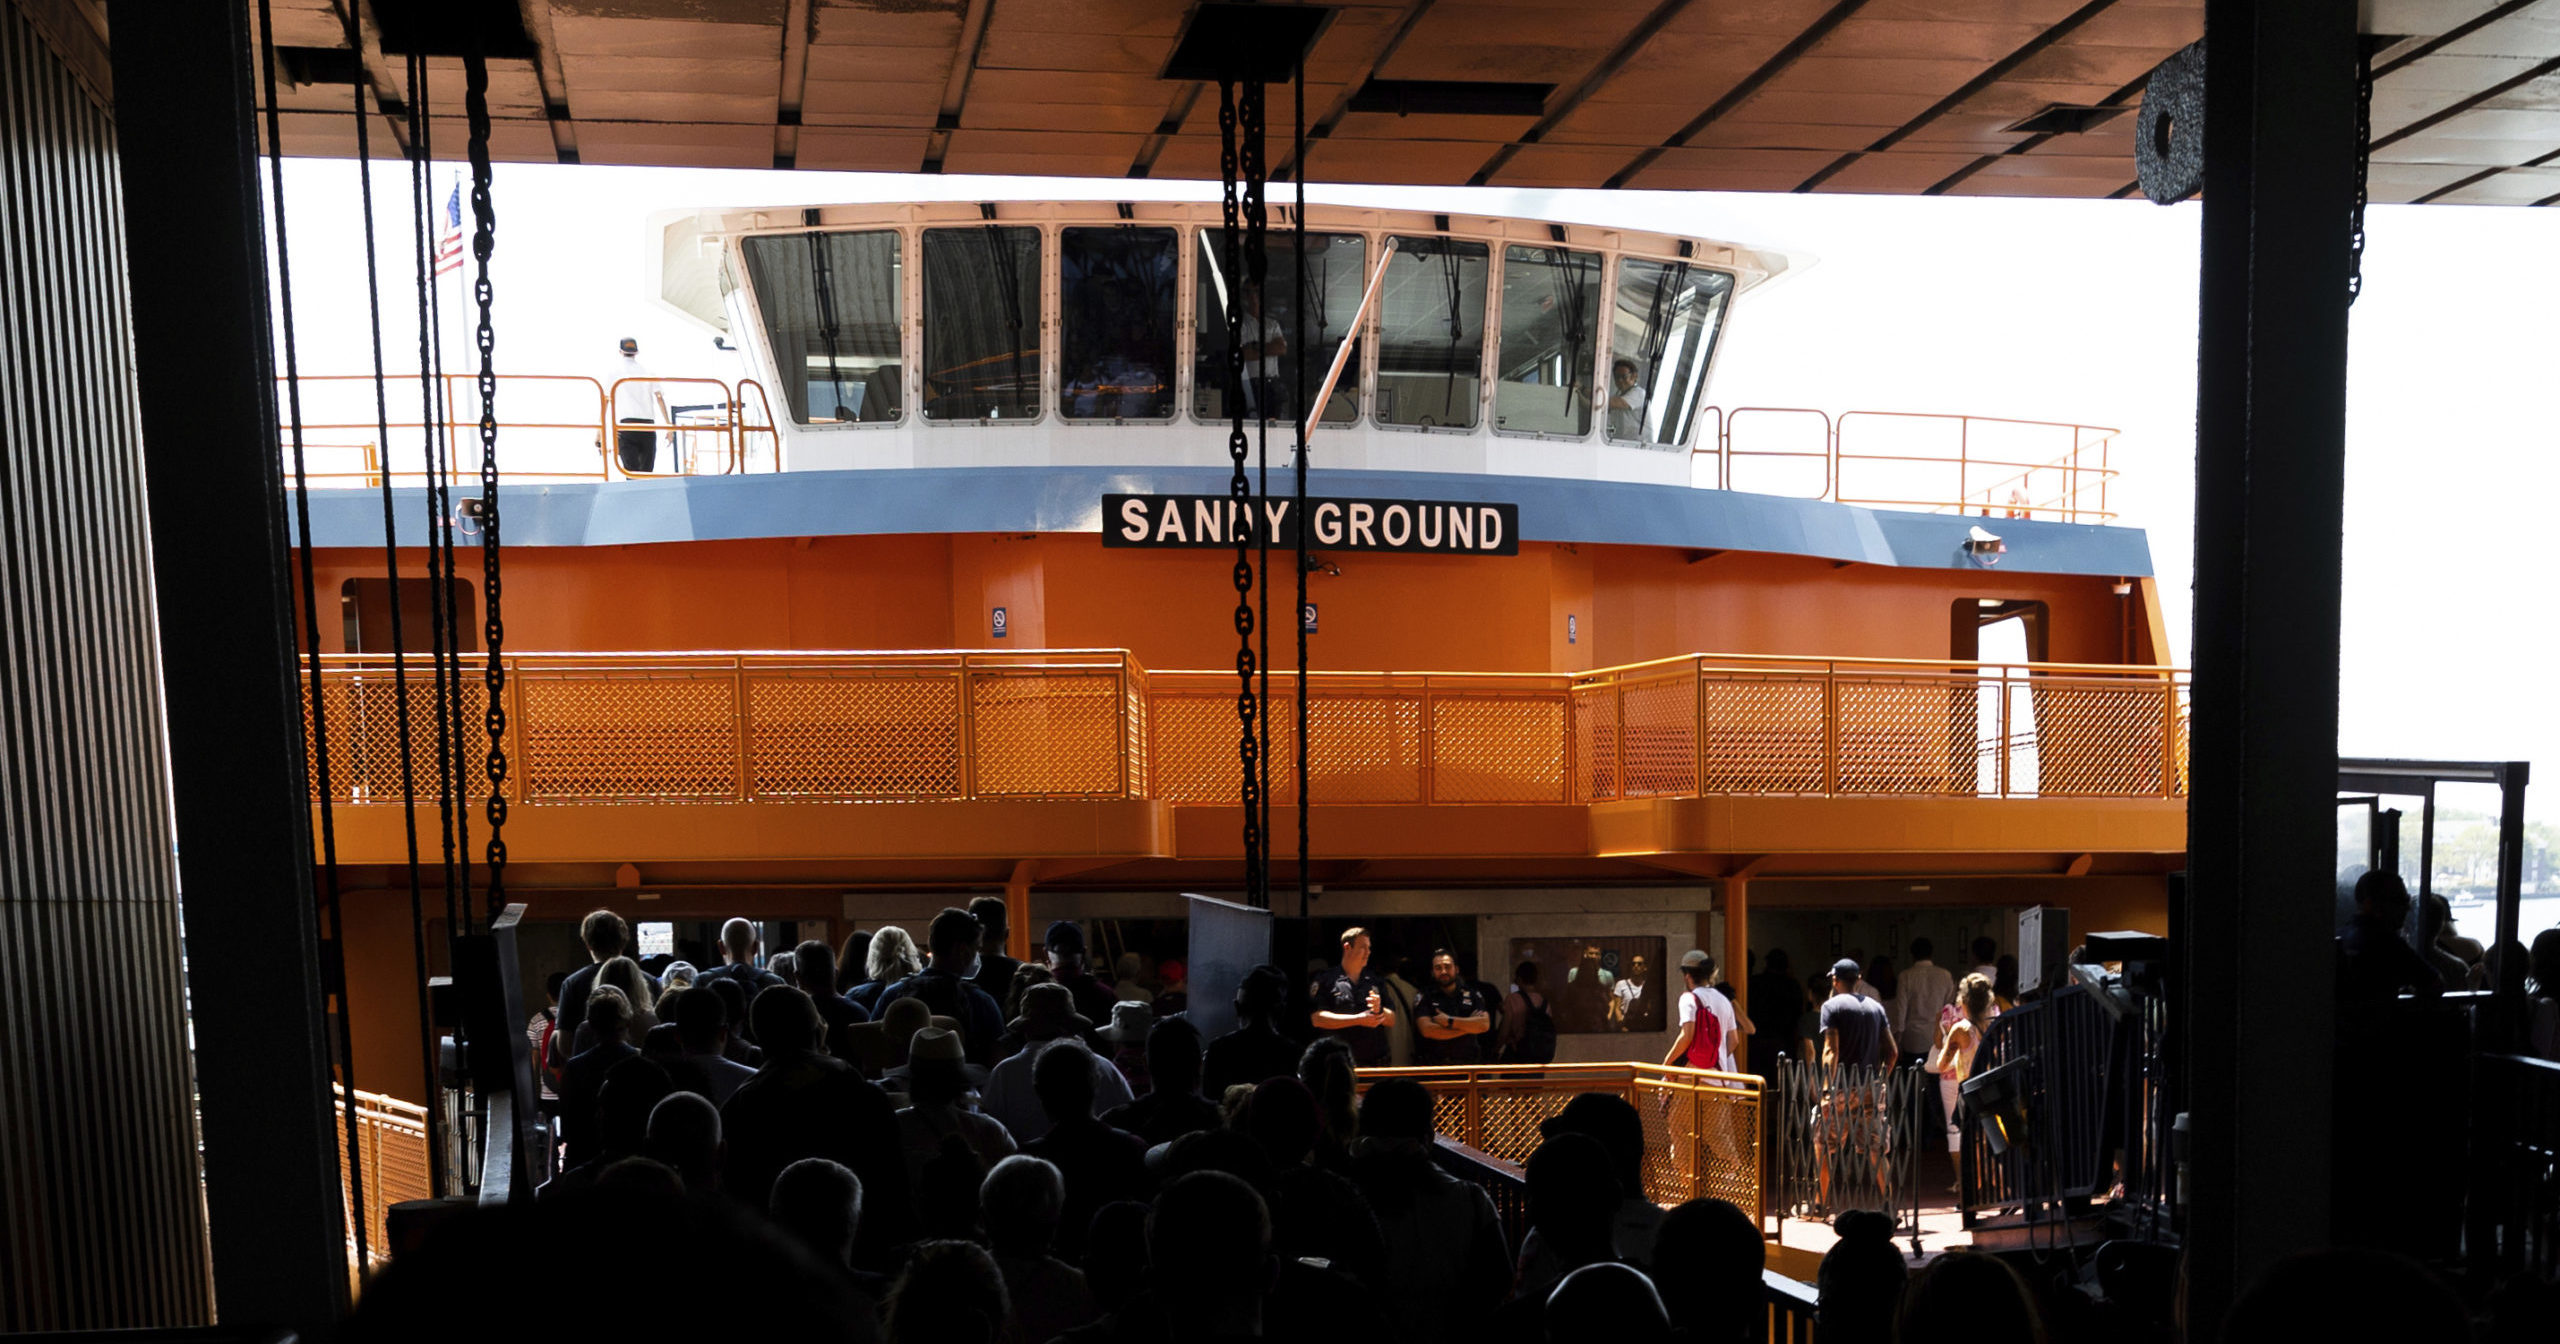 People board the Staten Island Ferry boat Sandy Ground in the Whitehall Terminal on Aug. 4 in New York.